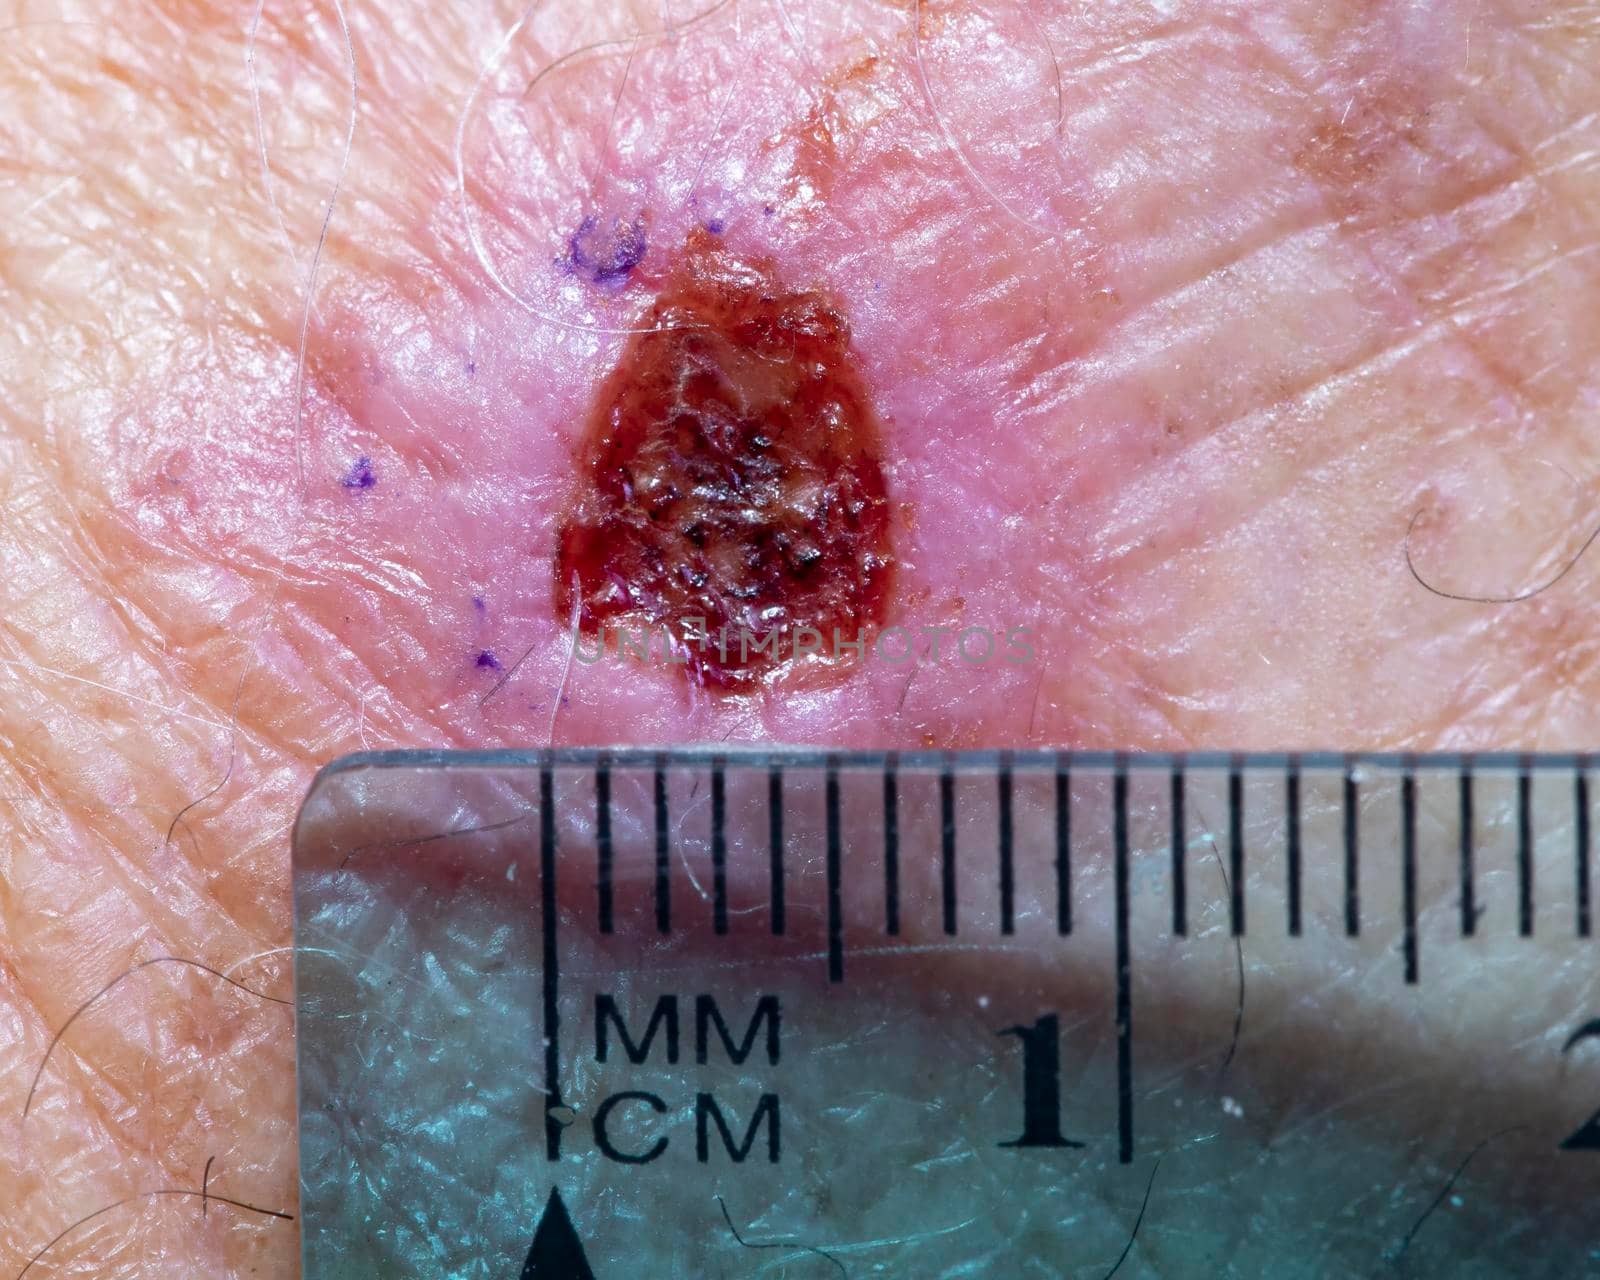 Incisional Biopsy Site on Male Hand by CharlieFloyd